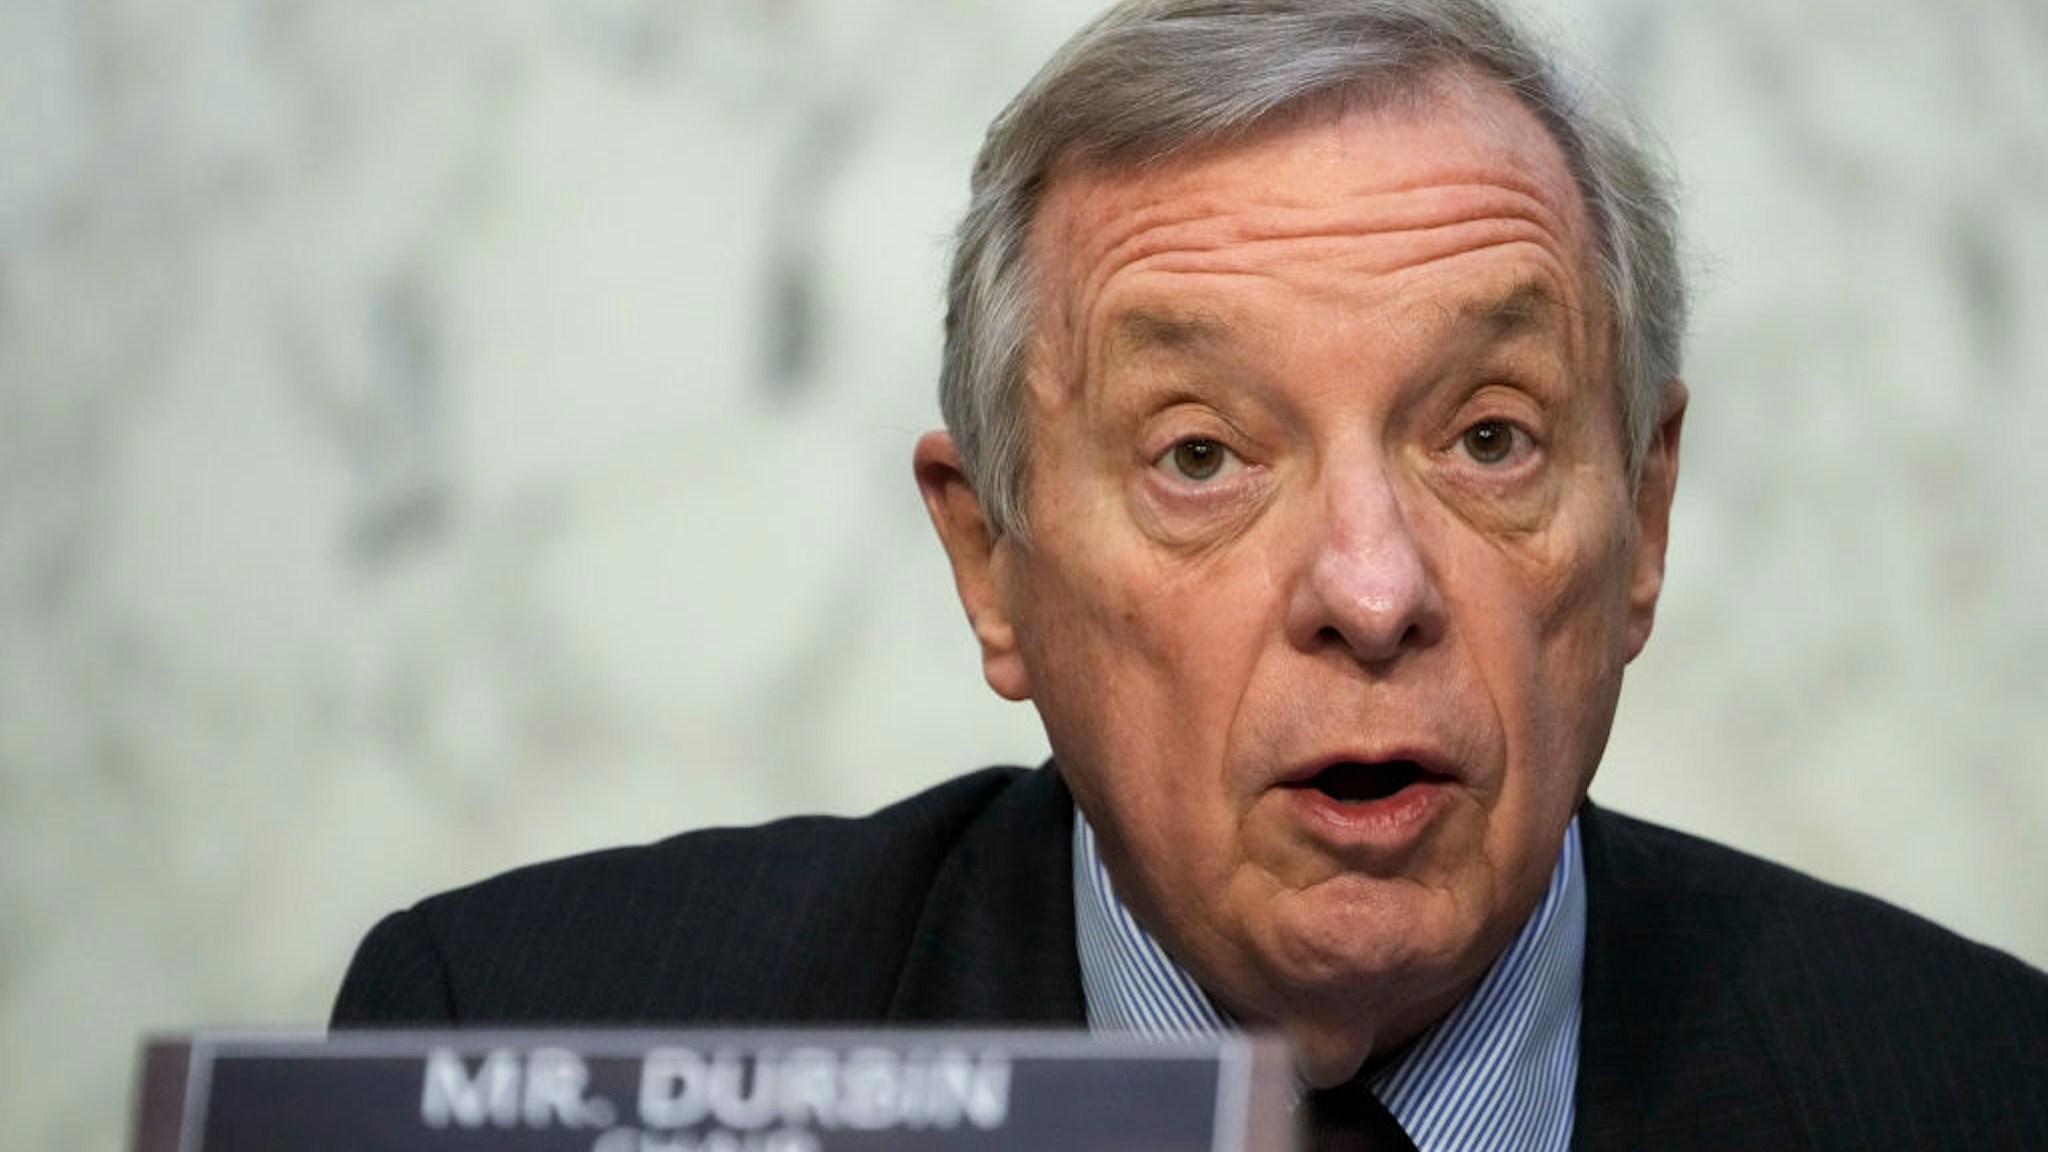 WASHINGTON, DC - JANUARY 11: Committee chairman Sen. Dick Durbin (D-IL) speaks during a Senate Judiciary Committee hearing on domestic terrorism threats, on Capitol Hill January 11, 2022 in Washington, DC. The hearing about domestic terrorism threats comes a year after the January 2021 Capitol riot. (Photo by Drew Angerer/Getty Images)